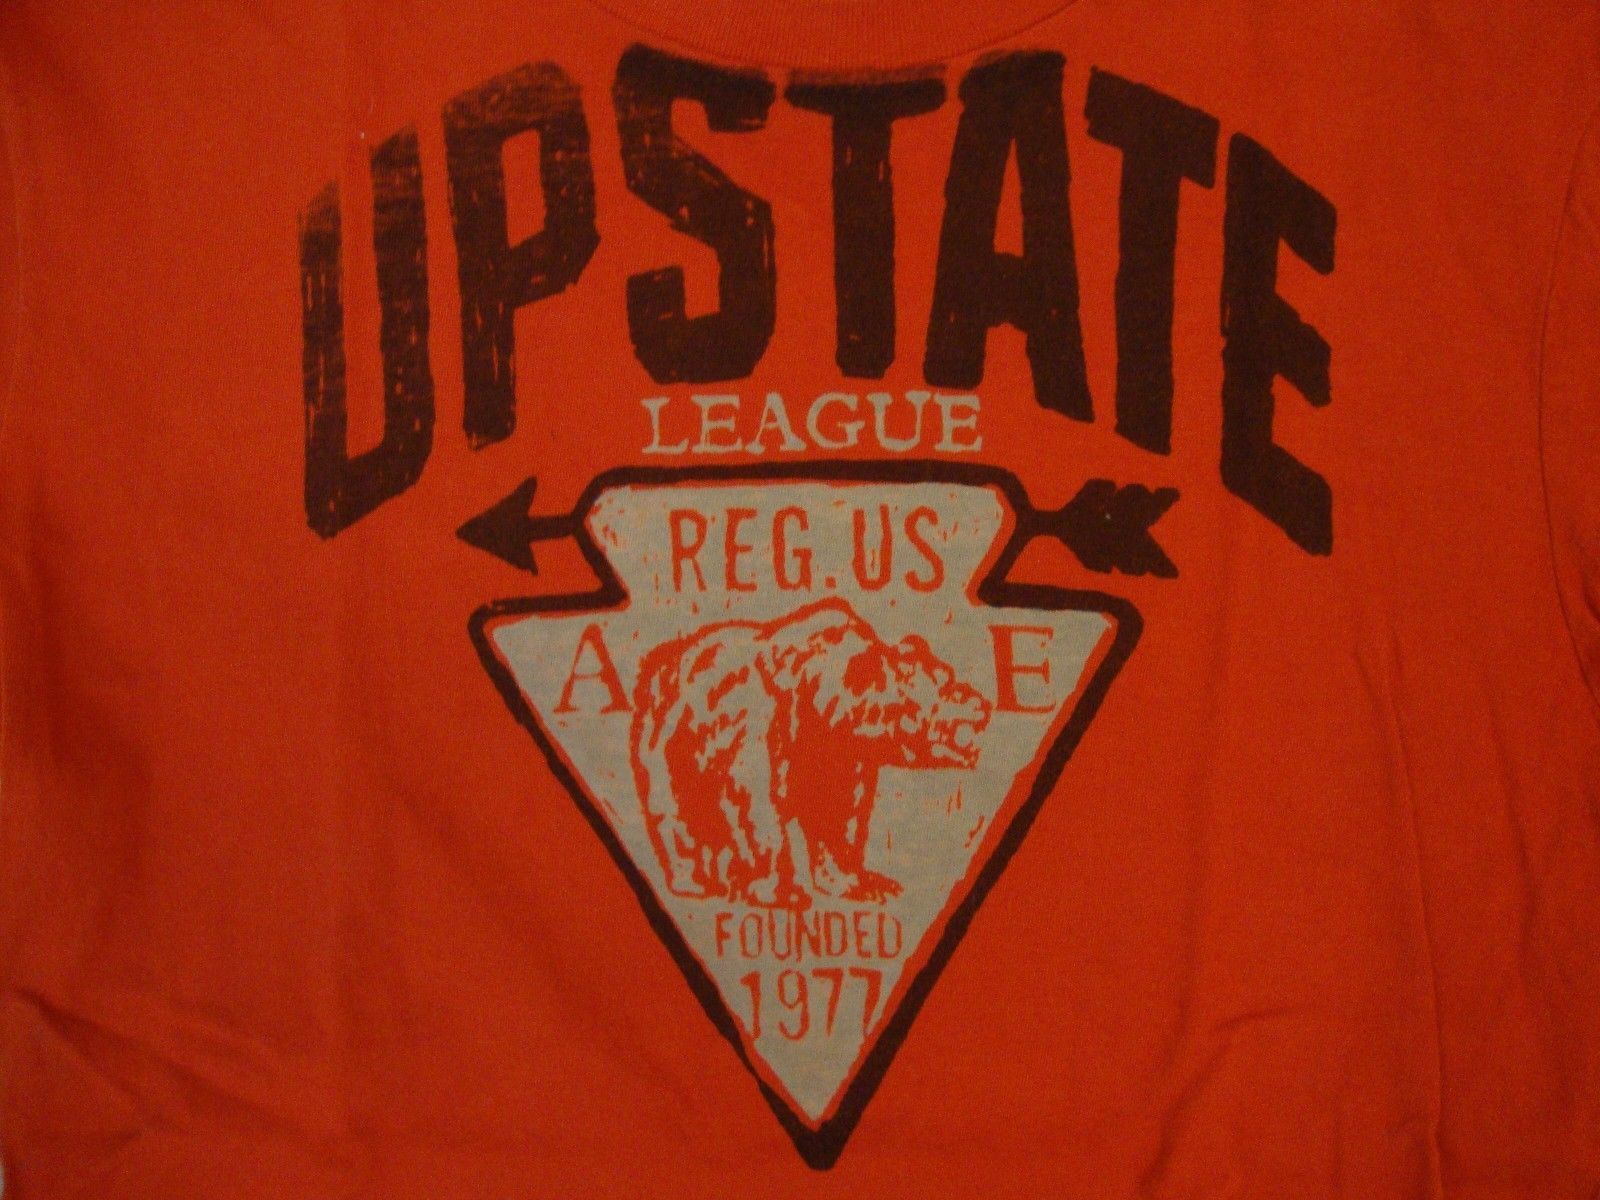 Primary image for American Eagle Upstate League Founded 1977 Red T Shirt S / M 